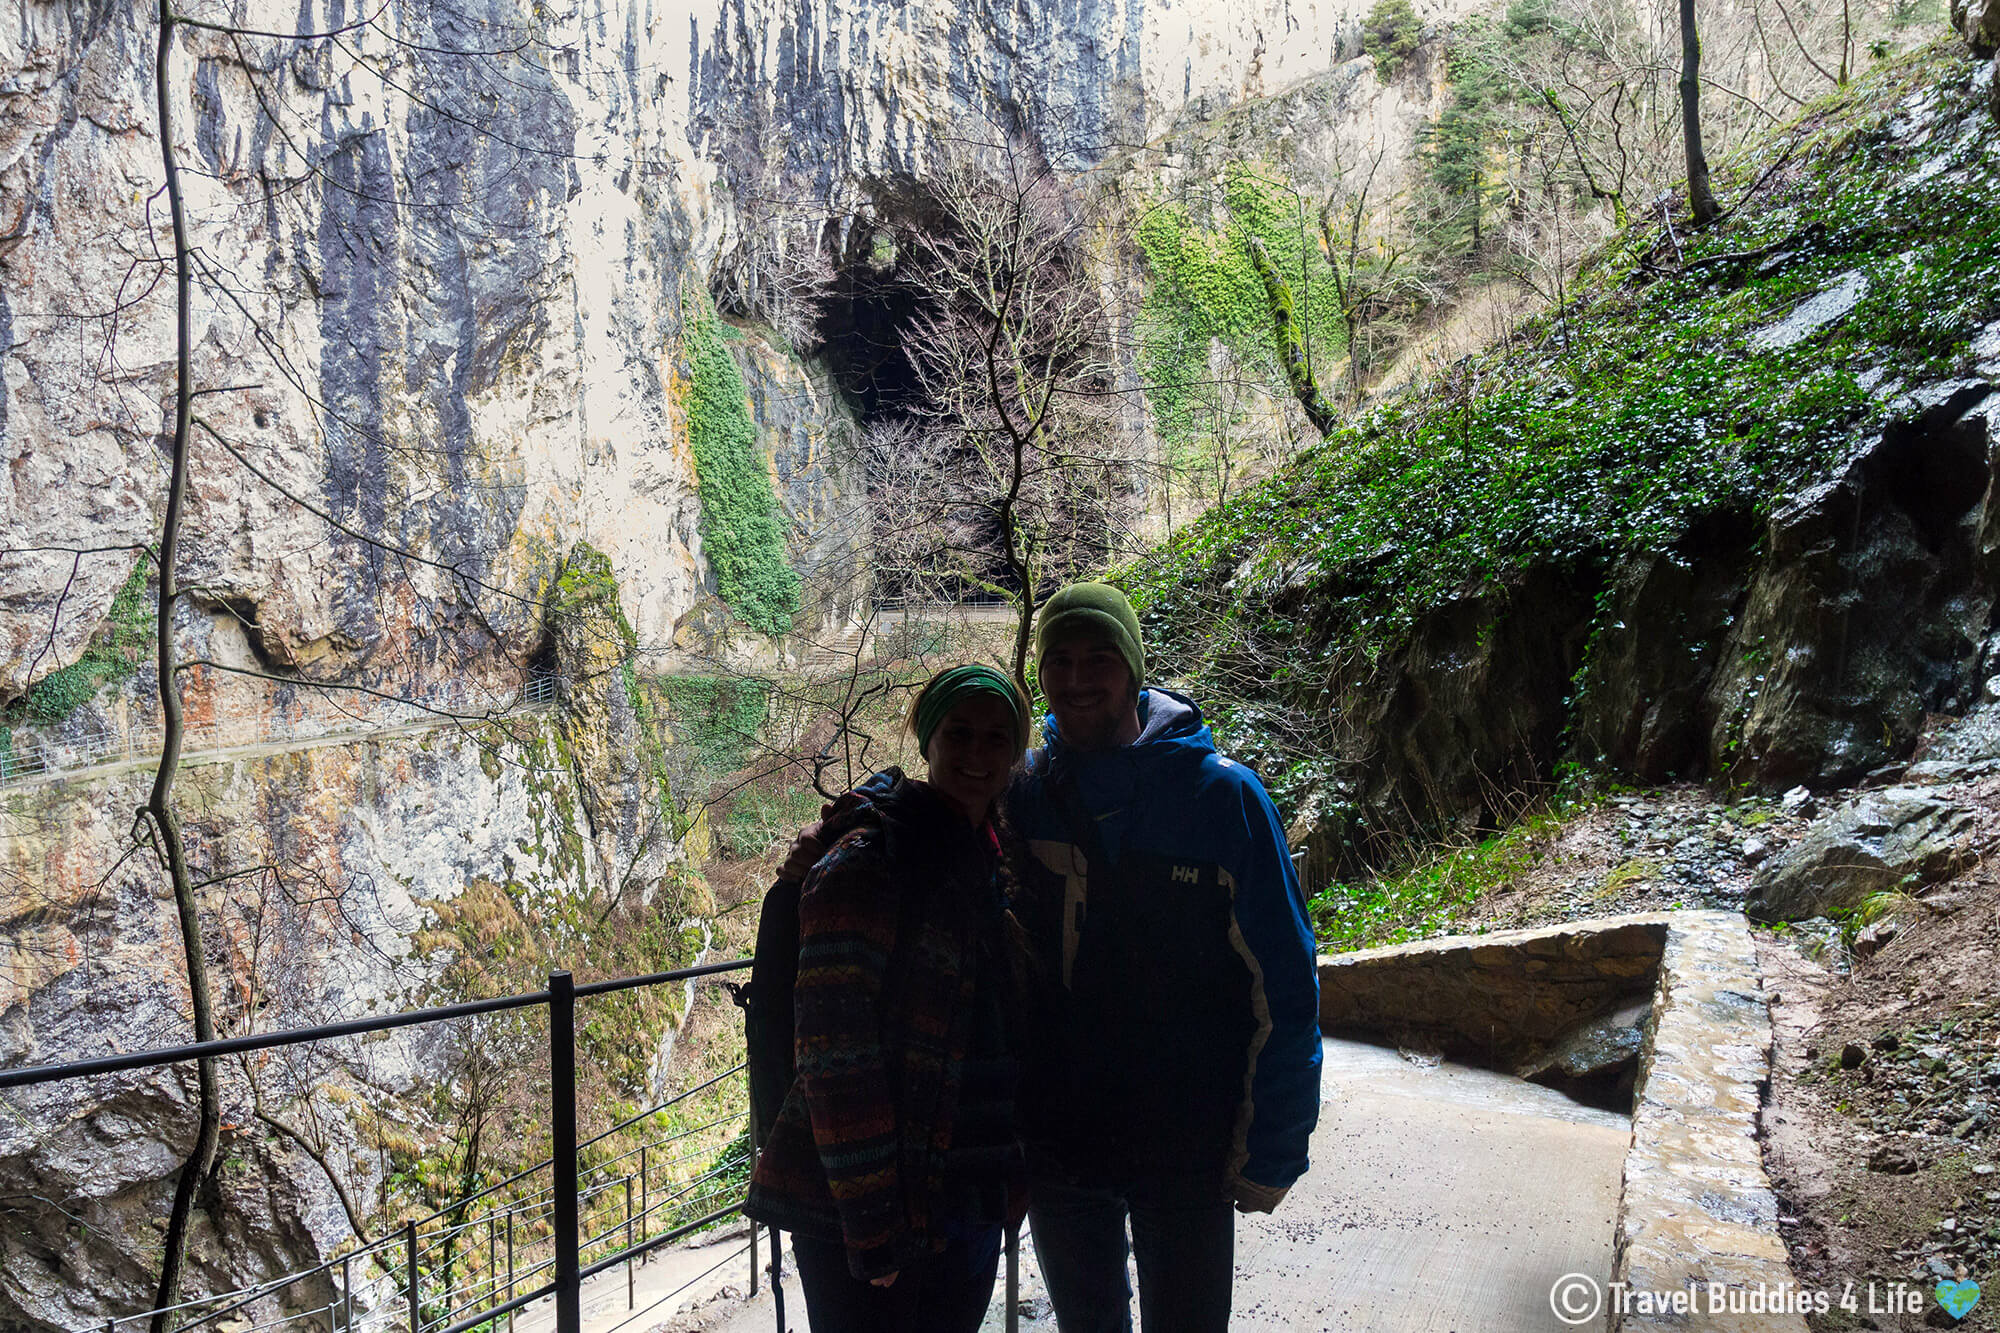 Joey and Ali Silhouette Outside of Slovenia's Škocjan Caves UNESCO Site in the Karst Region of Europe's Balkan Countries